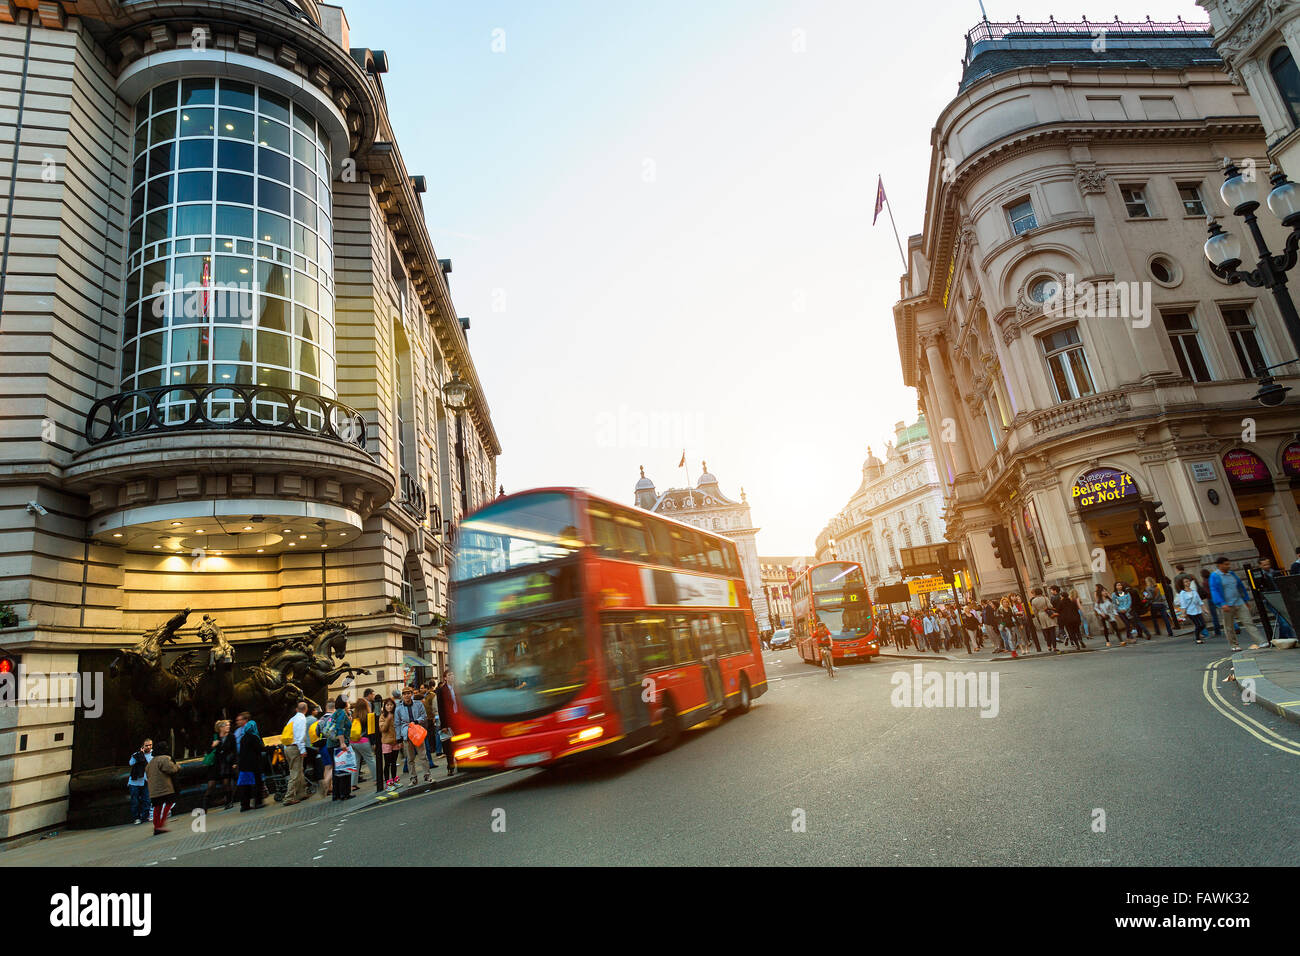 London, urban scene nearby Piccadilly Circus Stock Photo